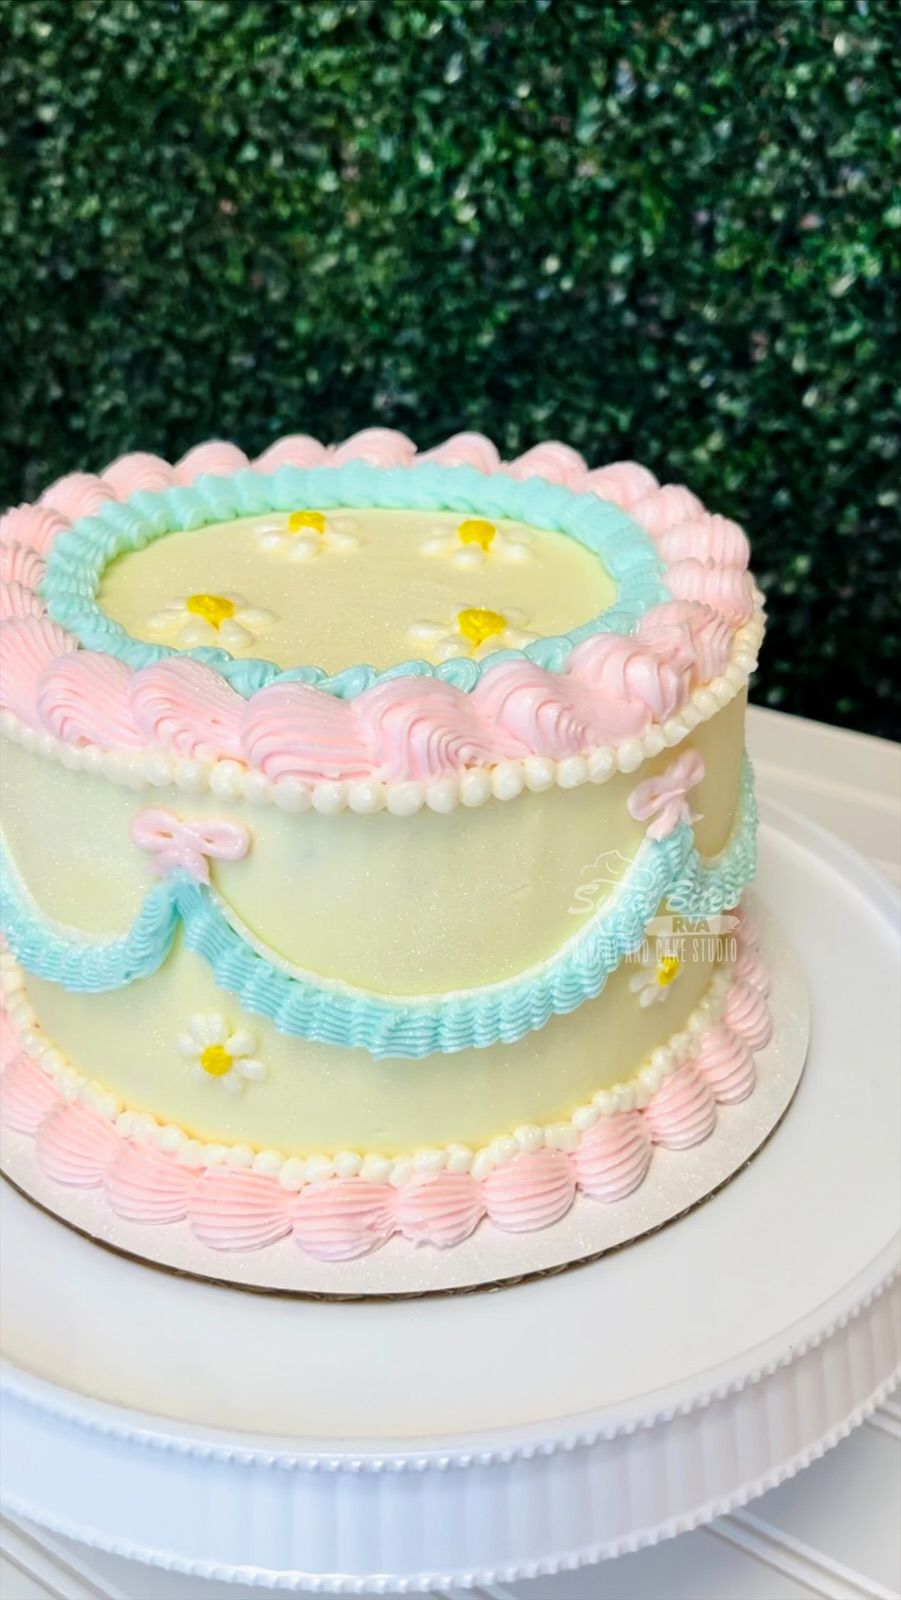 DIY Cake Class - Vintage Theme (Ages 13 & Up)